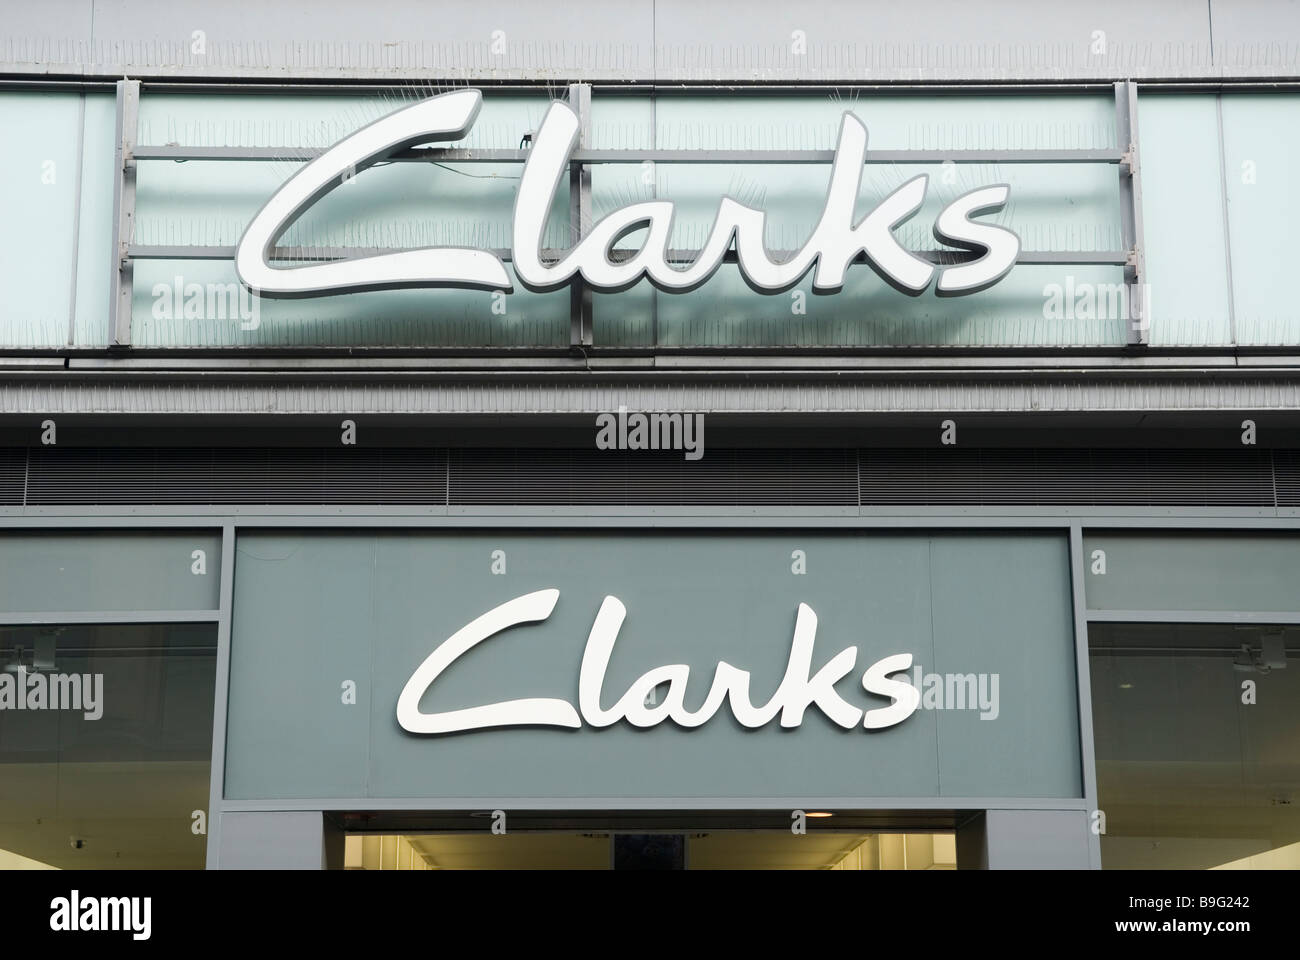 Clarks shoes sign hi-res stock photography images - Alamy